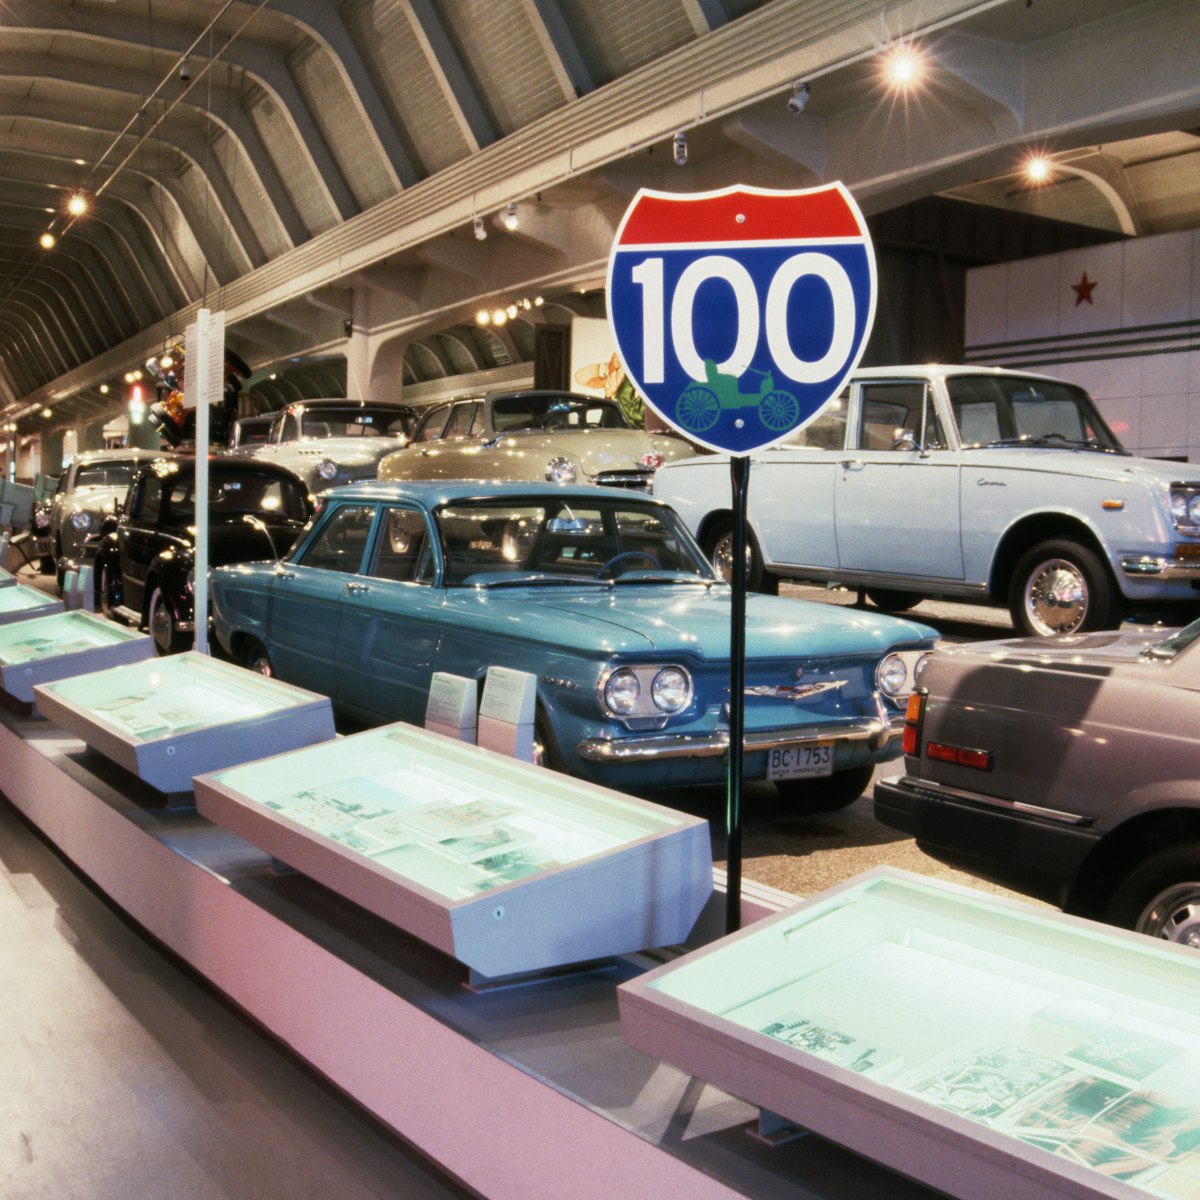 The exhibits at the Henry Ford Museum feature all makes of automobiles and tell the reader how they affected American culture.